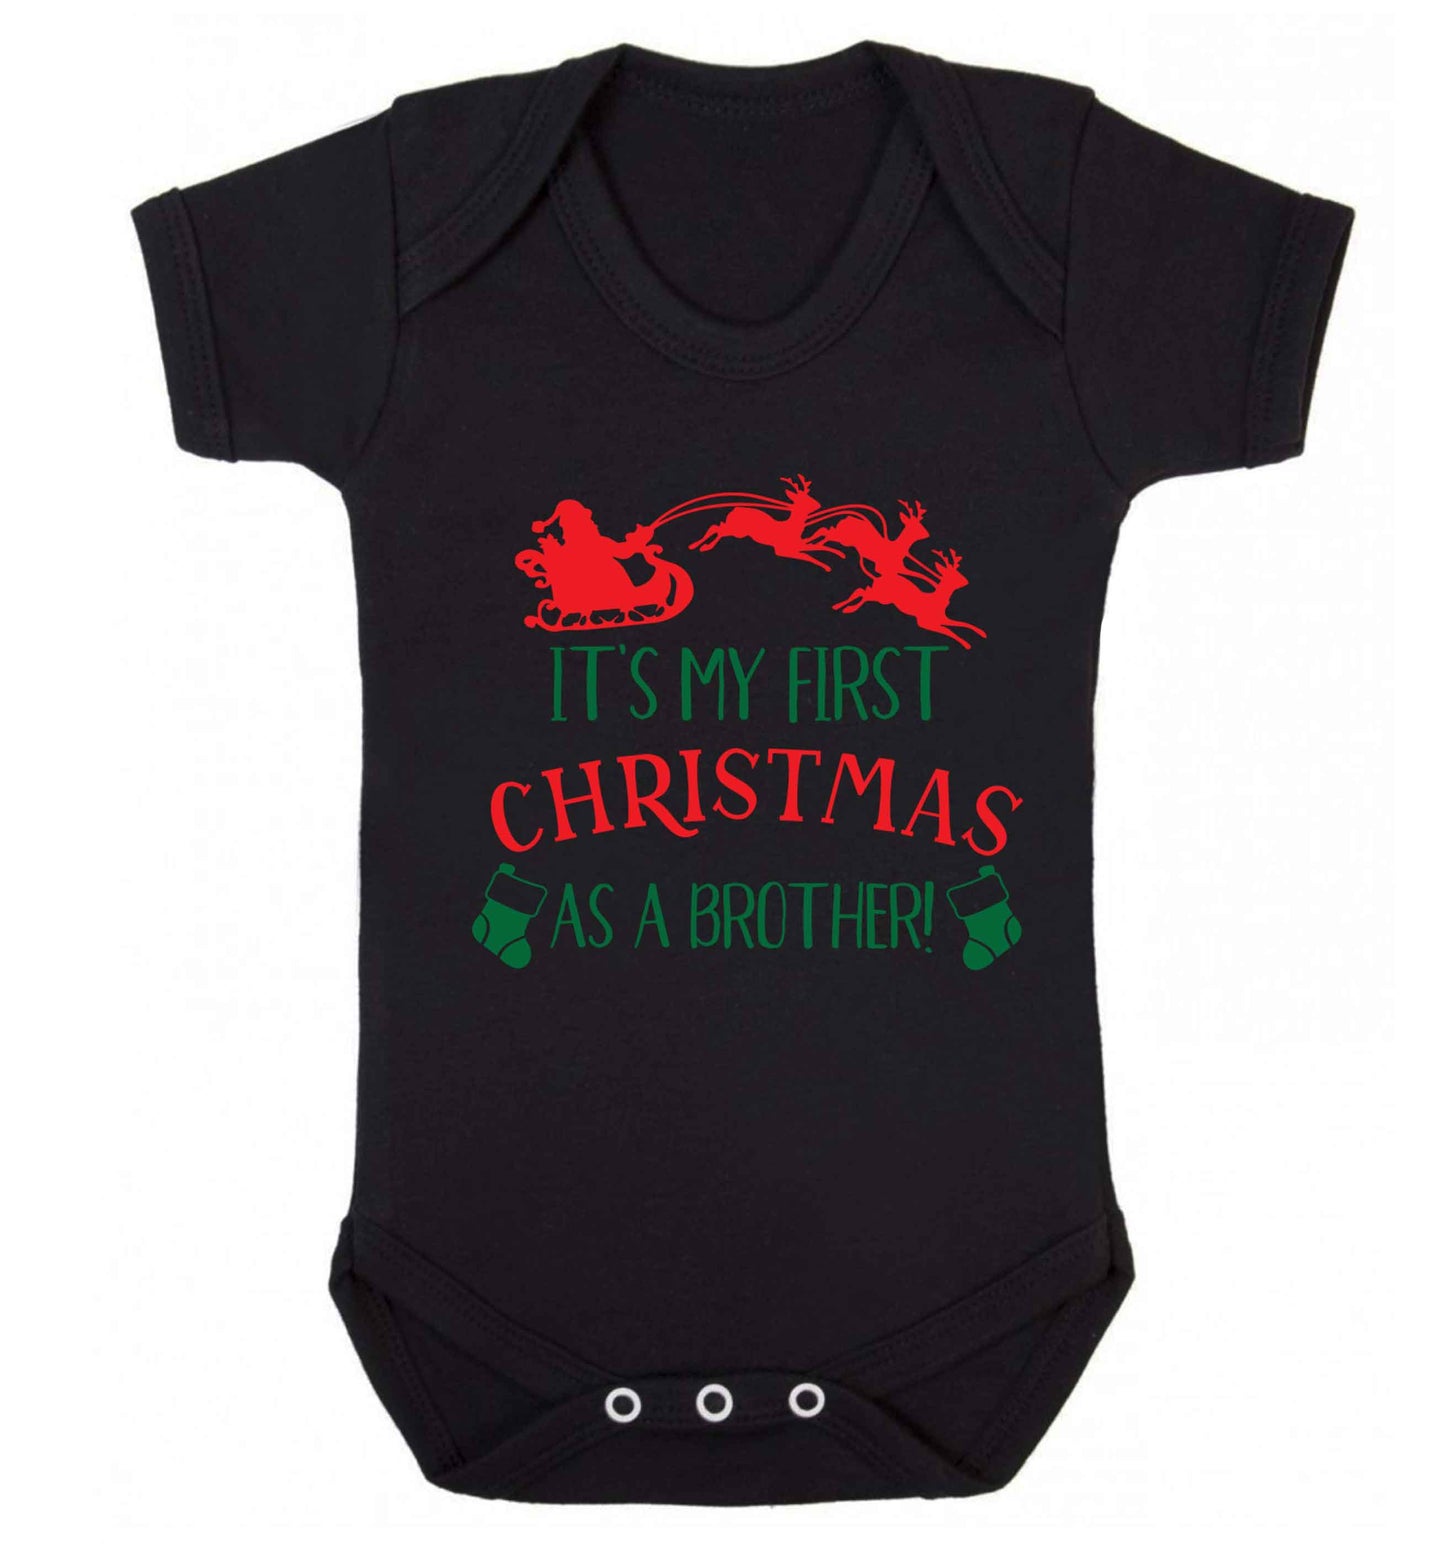 It's my first Christmas as a brother! Baby Vest black 18-24 months